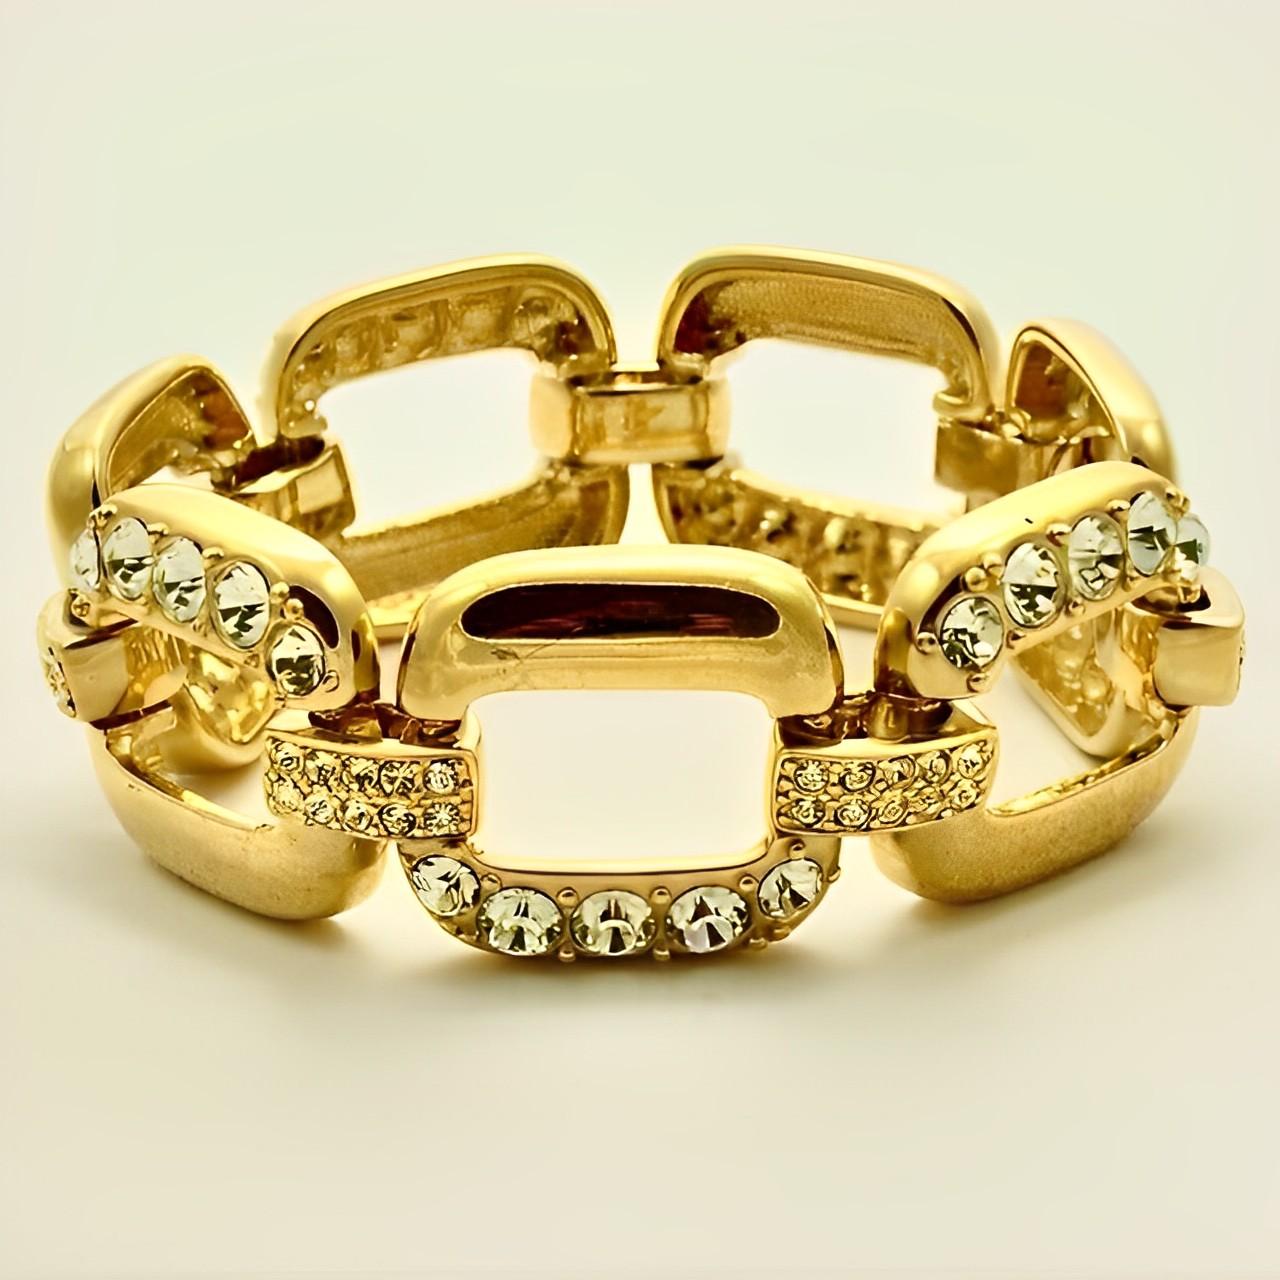 Gold Plated Wide Link Statement Bracelet with Crystals circa 1980s In Good Condition For Sale In London, GB